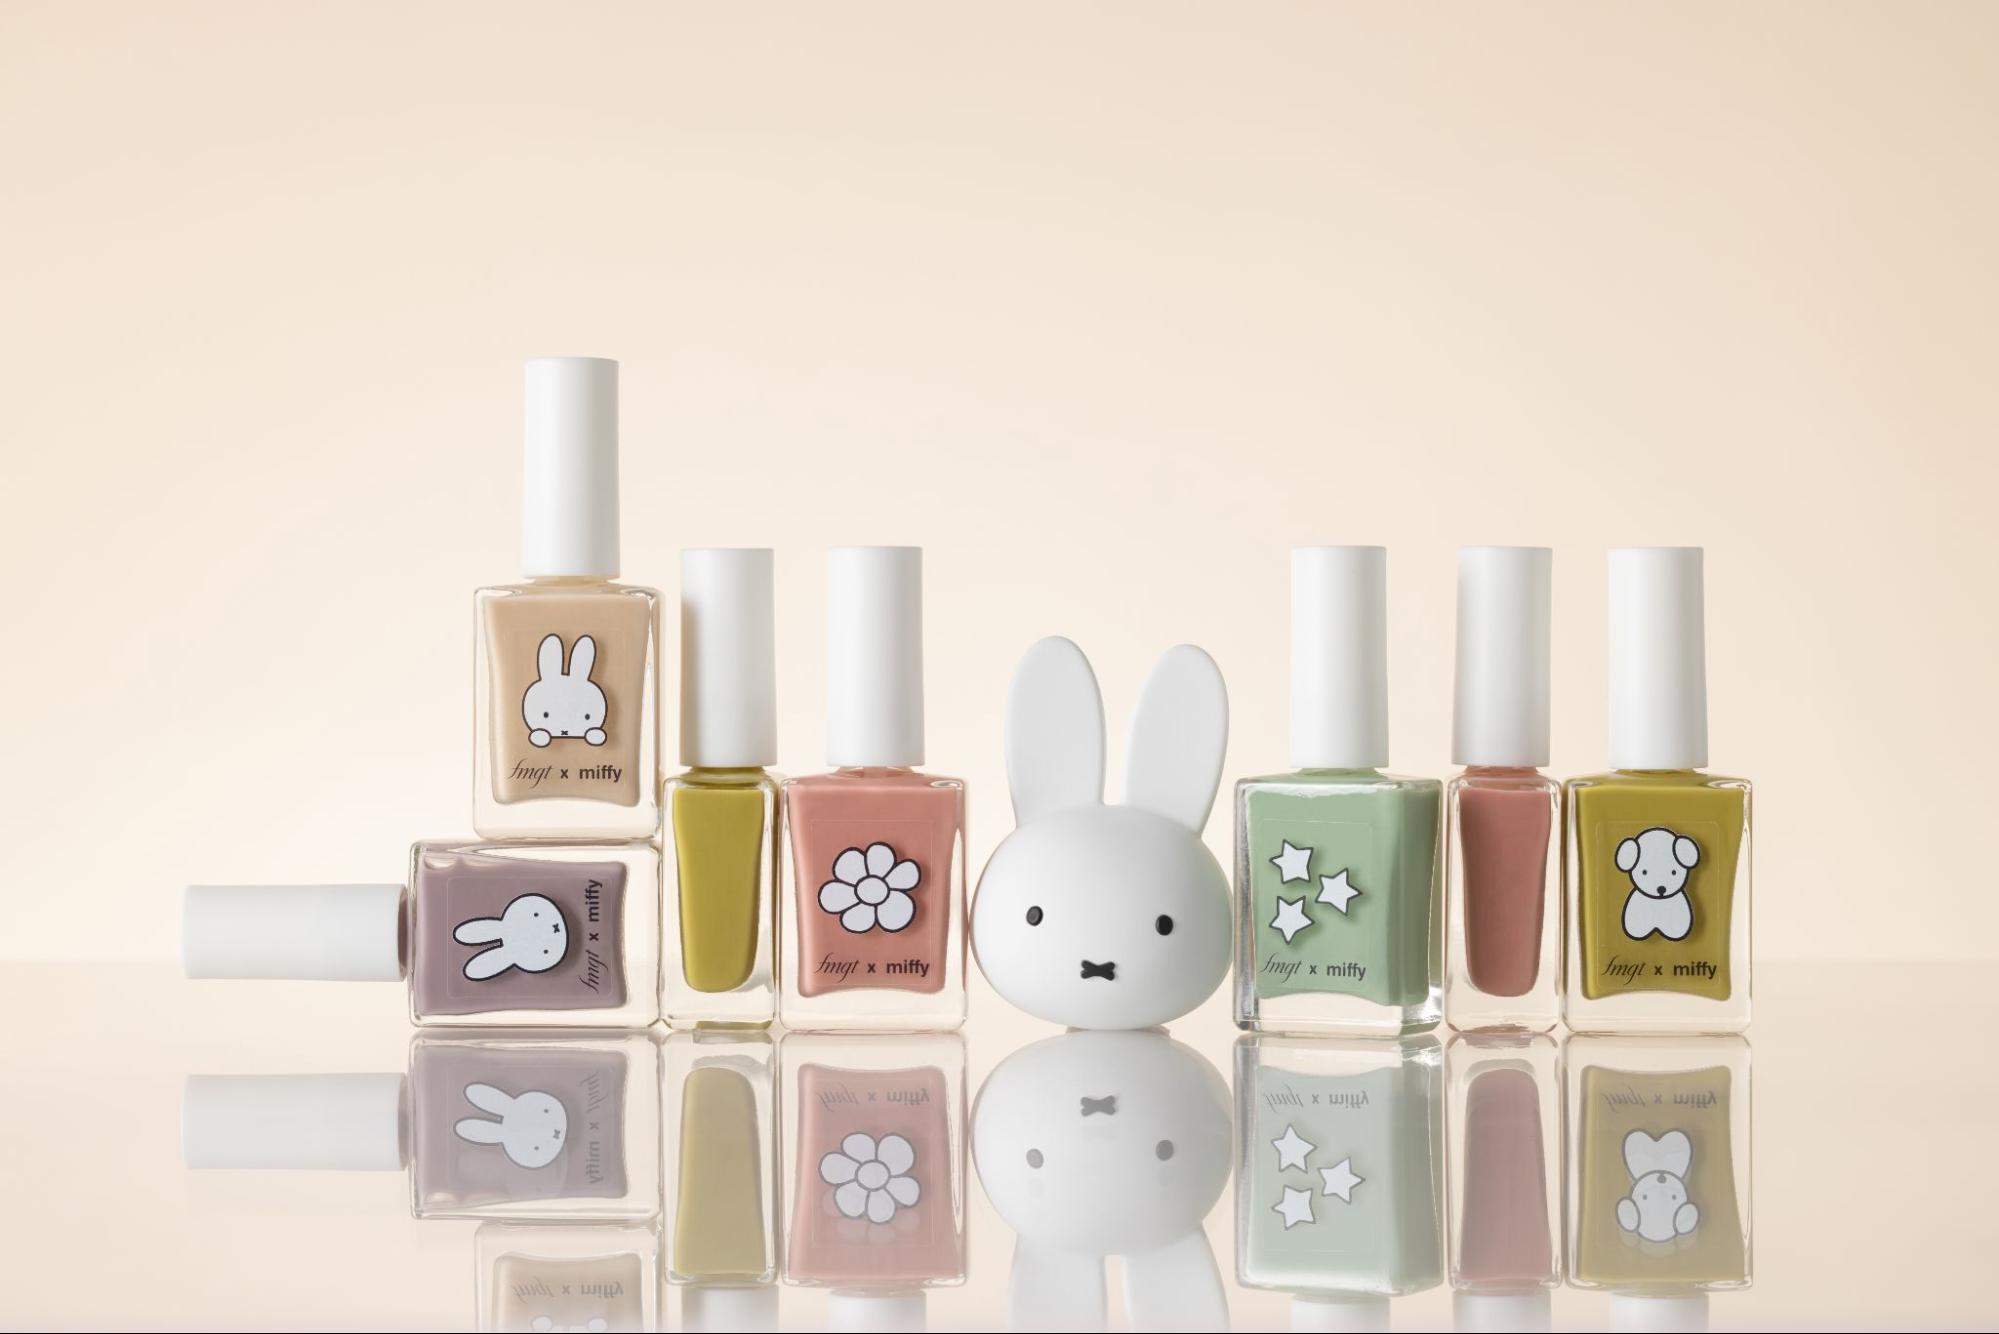 The Face Shop x Miffy